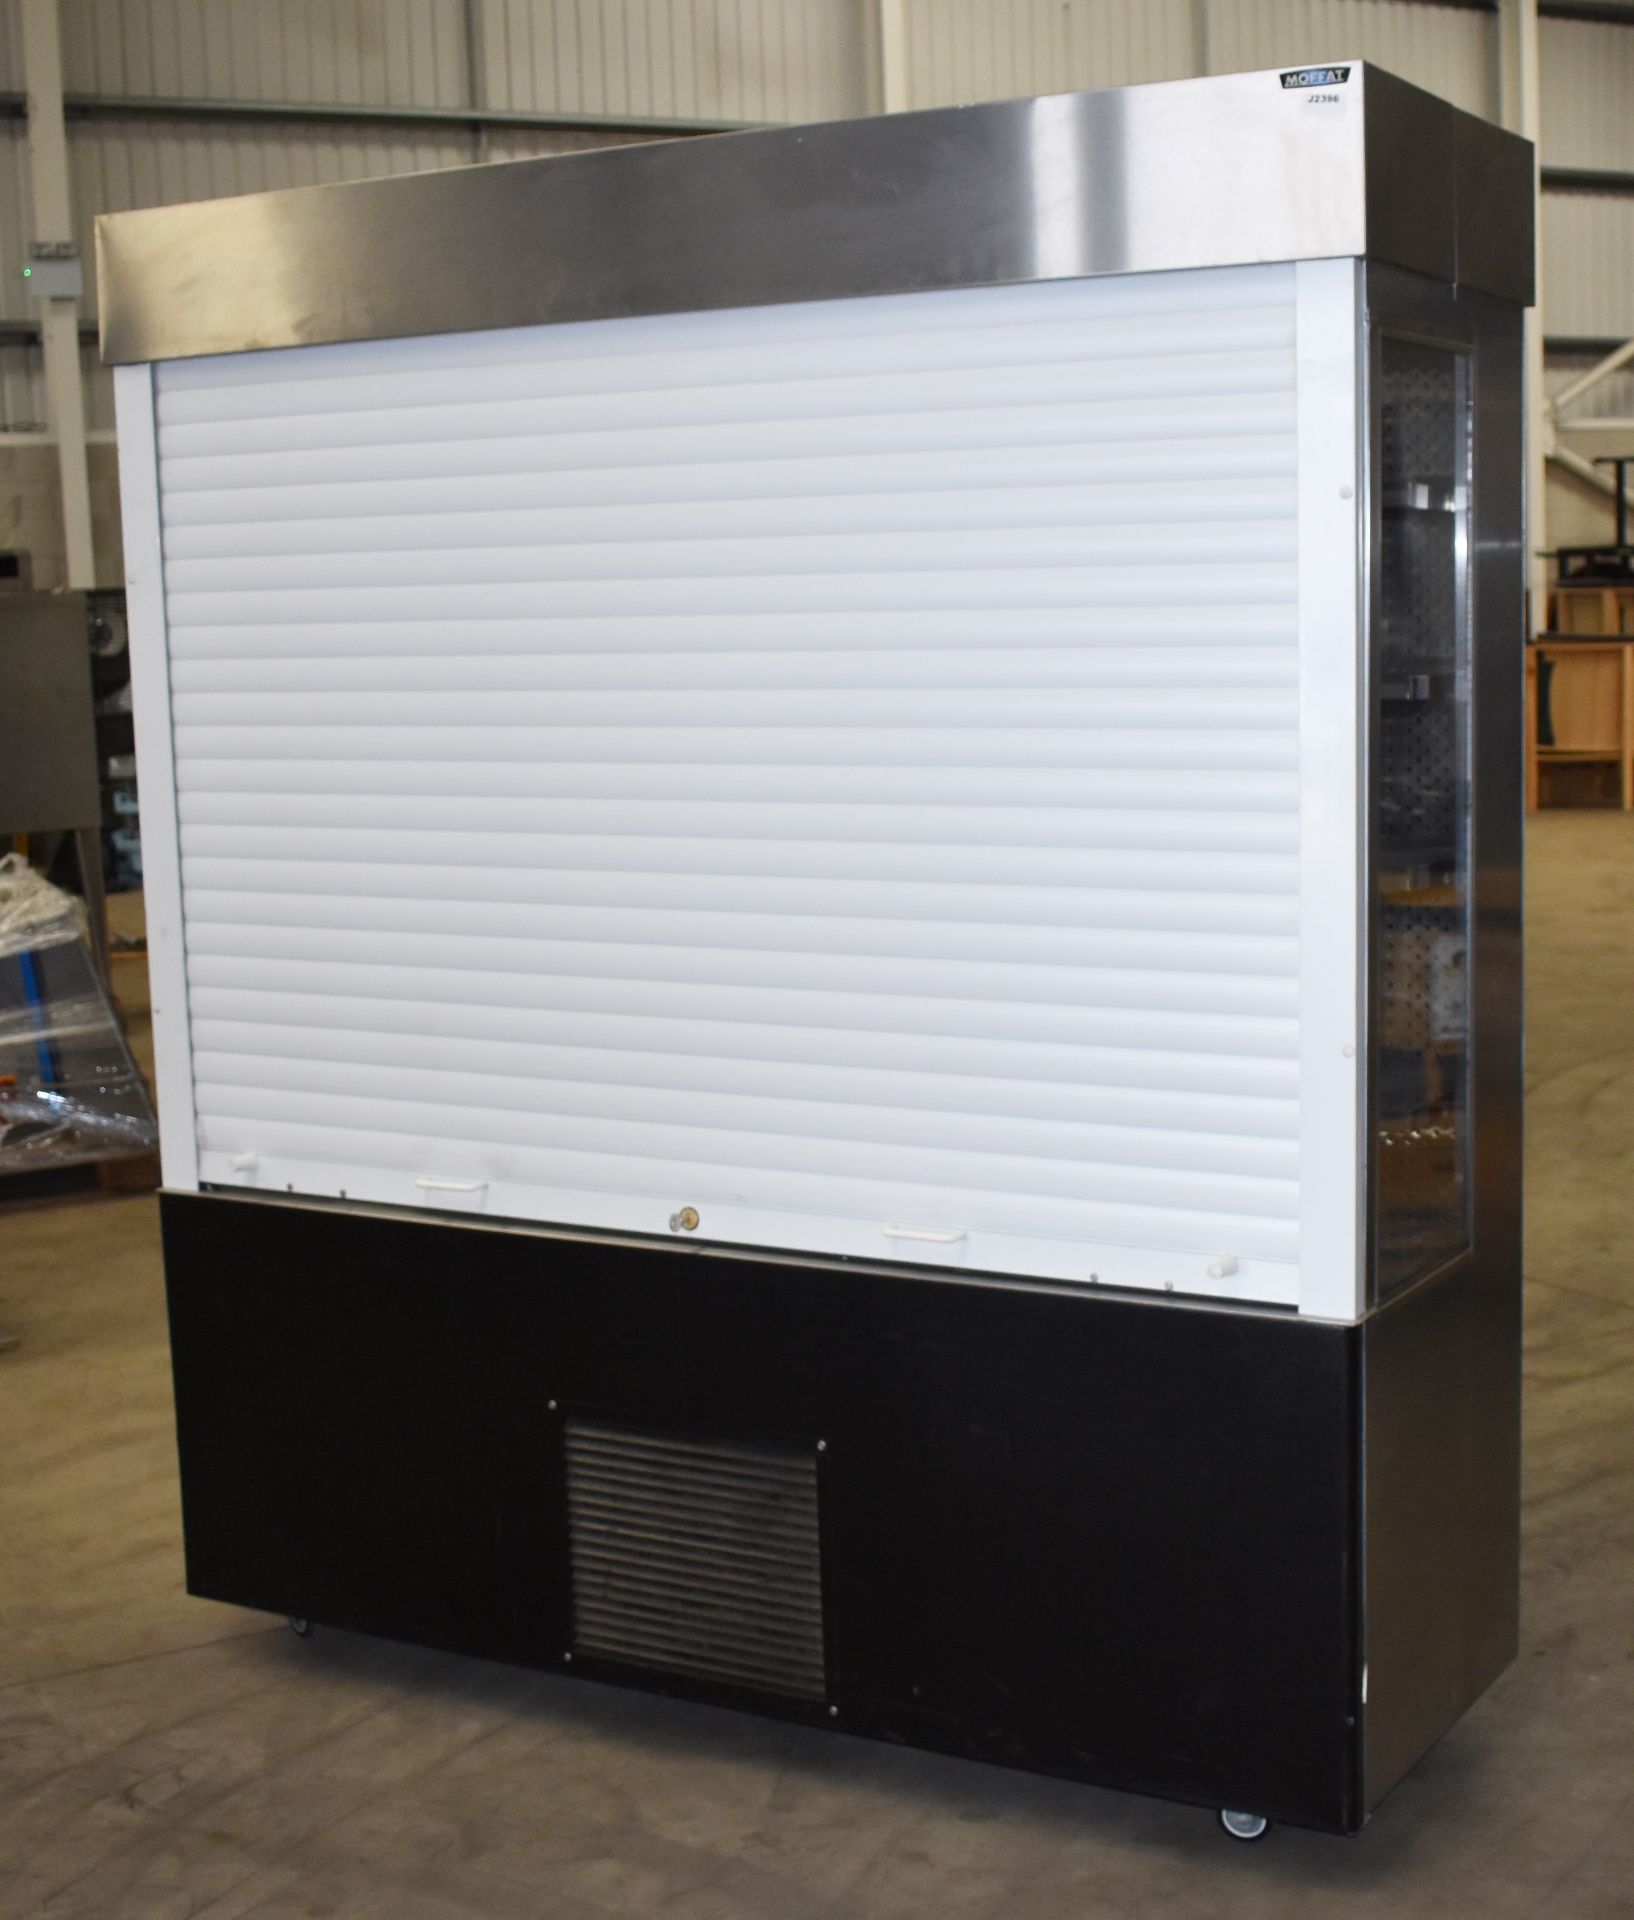 1 x Moffat Chilled Merchandiser With Lockable Roller Shutter - Includes Key - Model MM18LSA - - Image 5 of 8